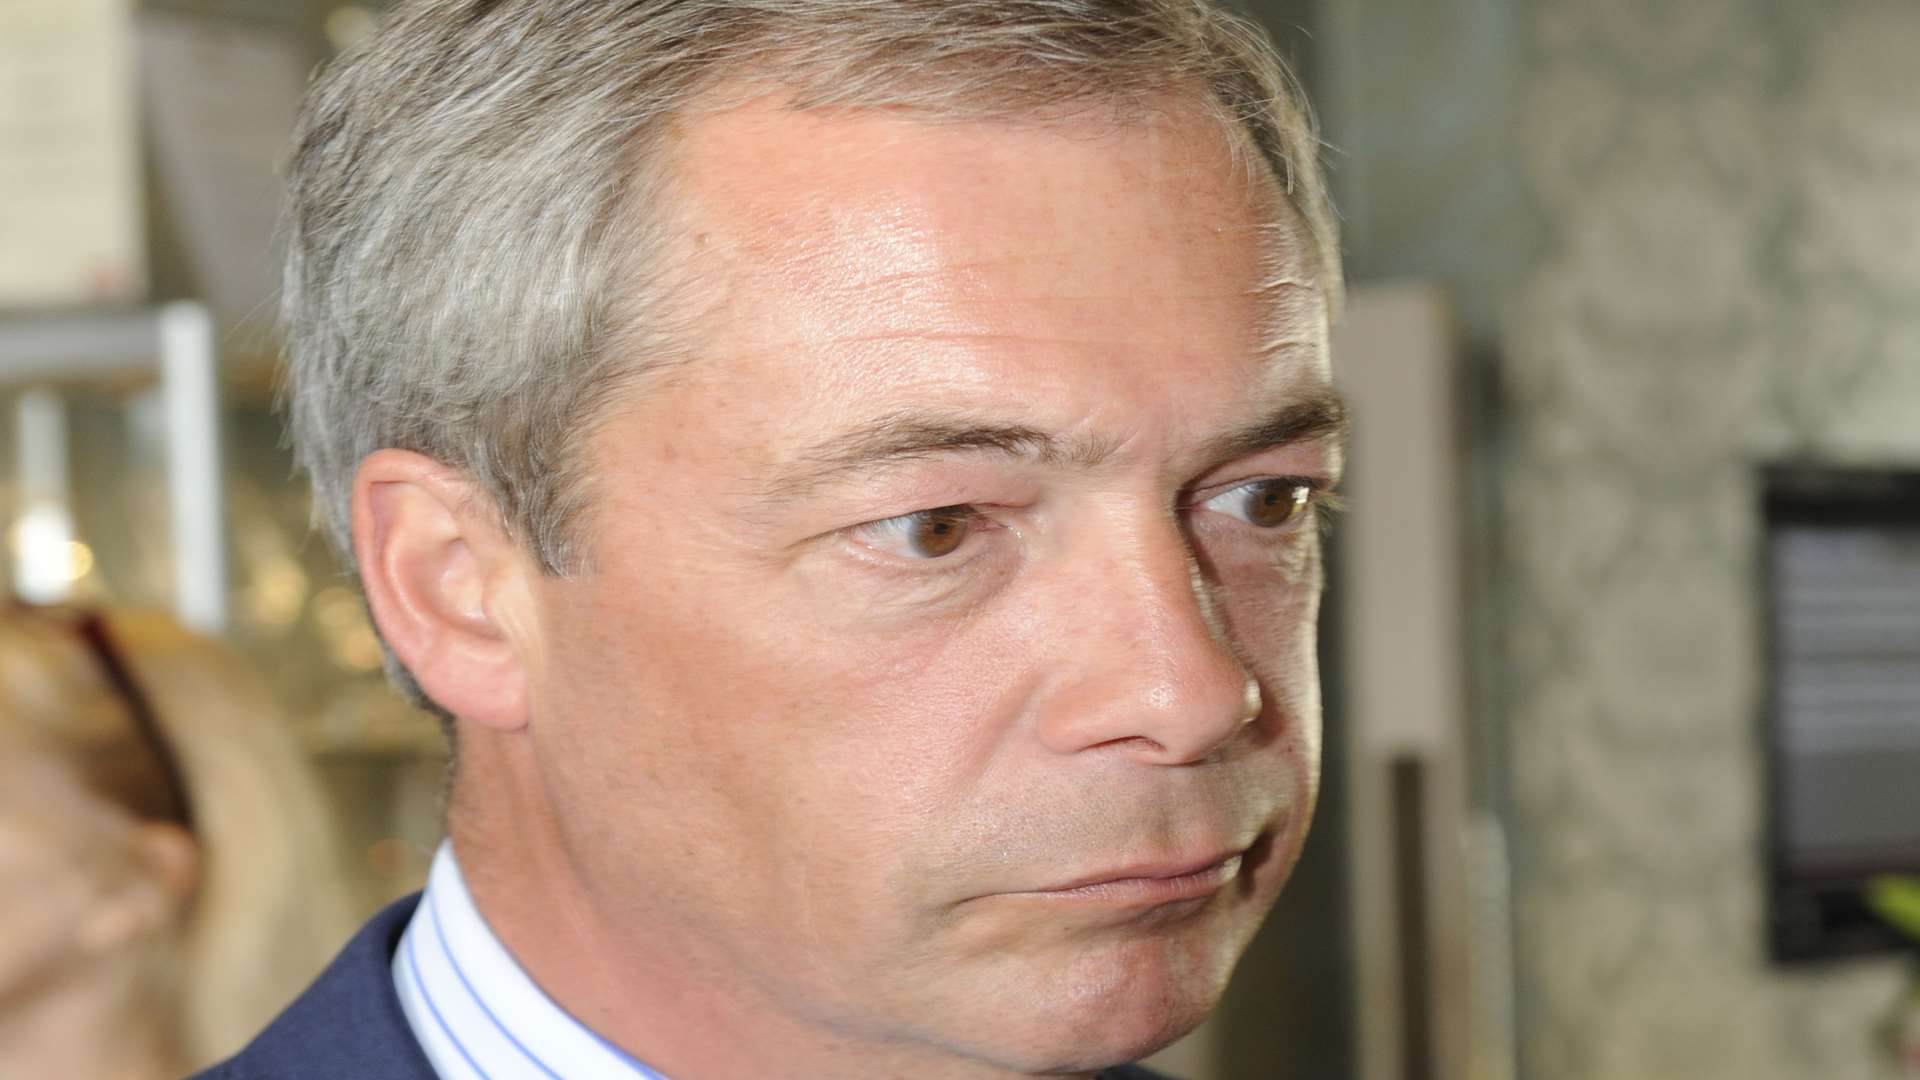 Nigel Farage's visit to Herne Bay was cancelled over security fears